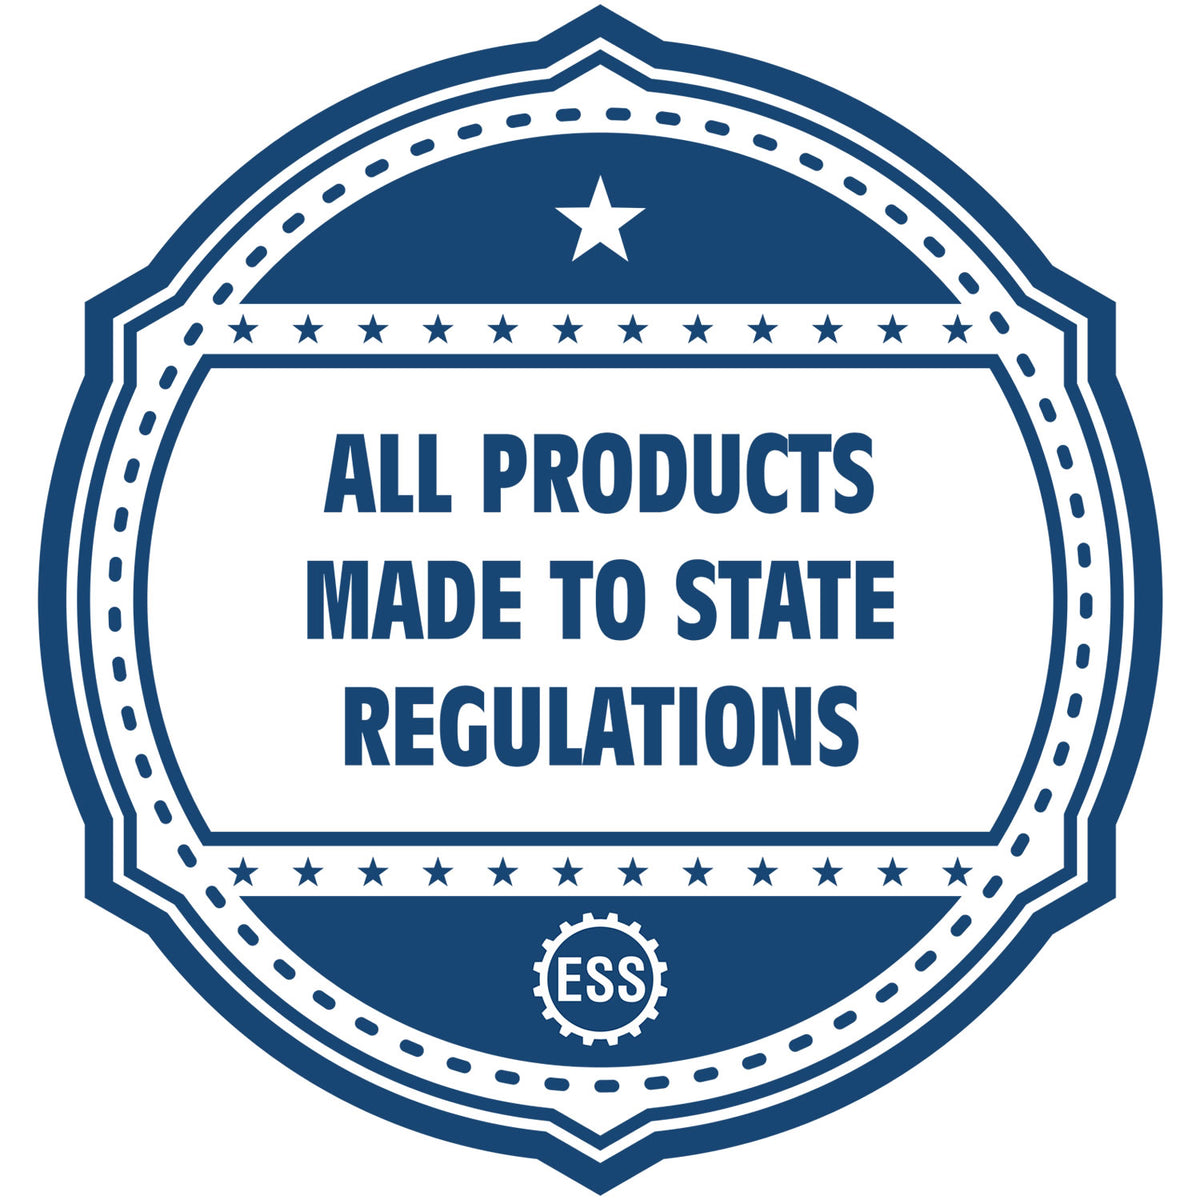 A blue icon or badge for the Heavy Duty Cast Iron Missouri Geologist Seal Embosser showing that this product is made in compliance with state regulations.